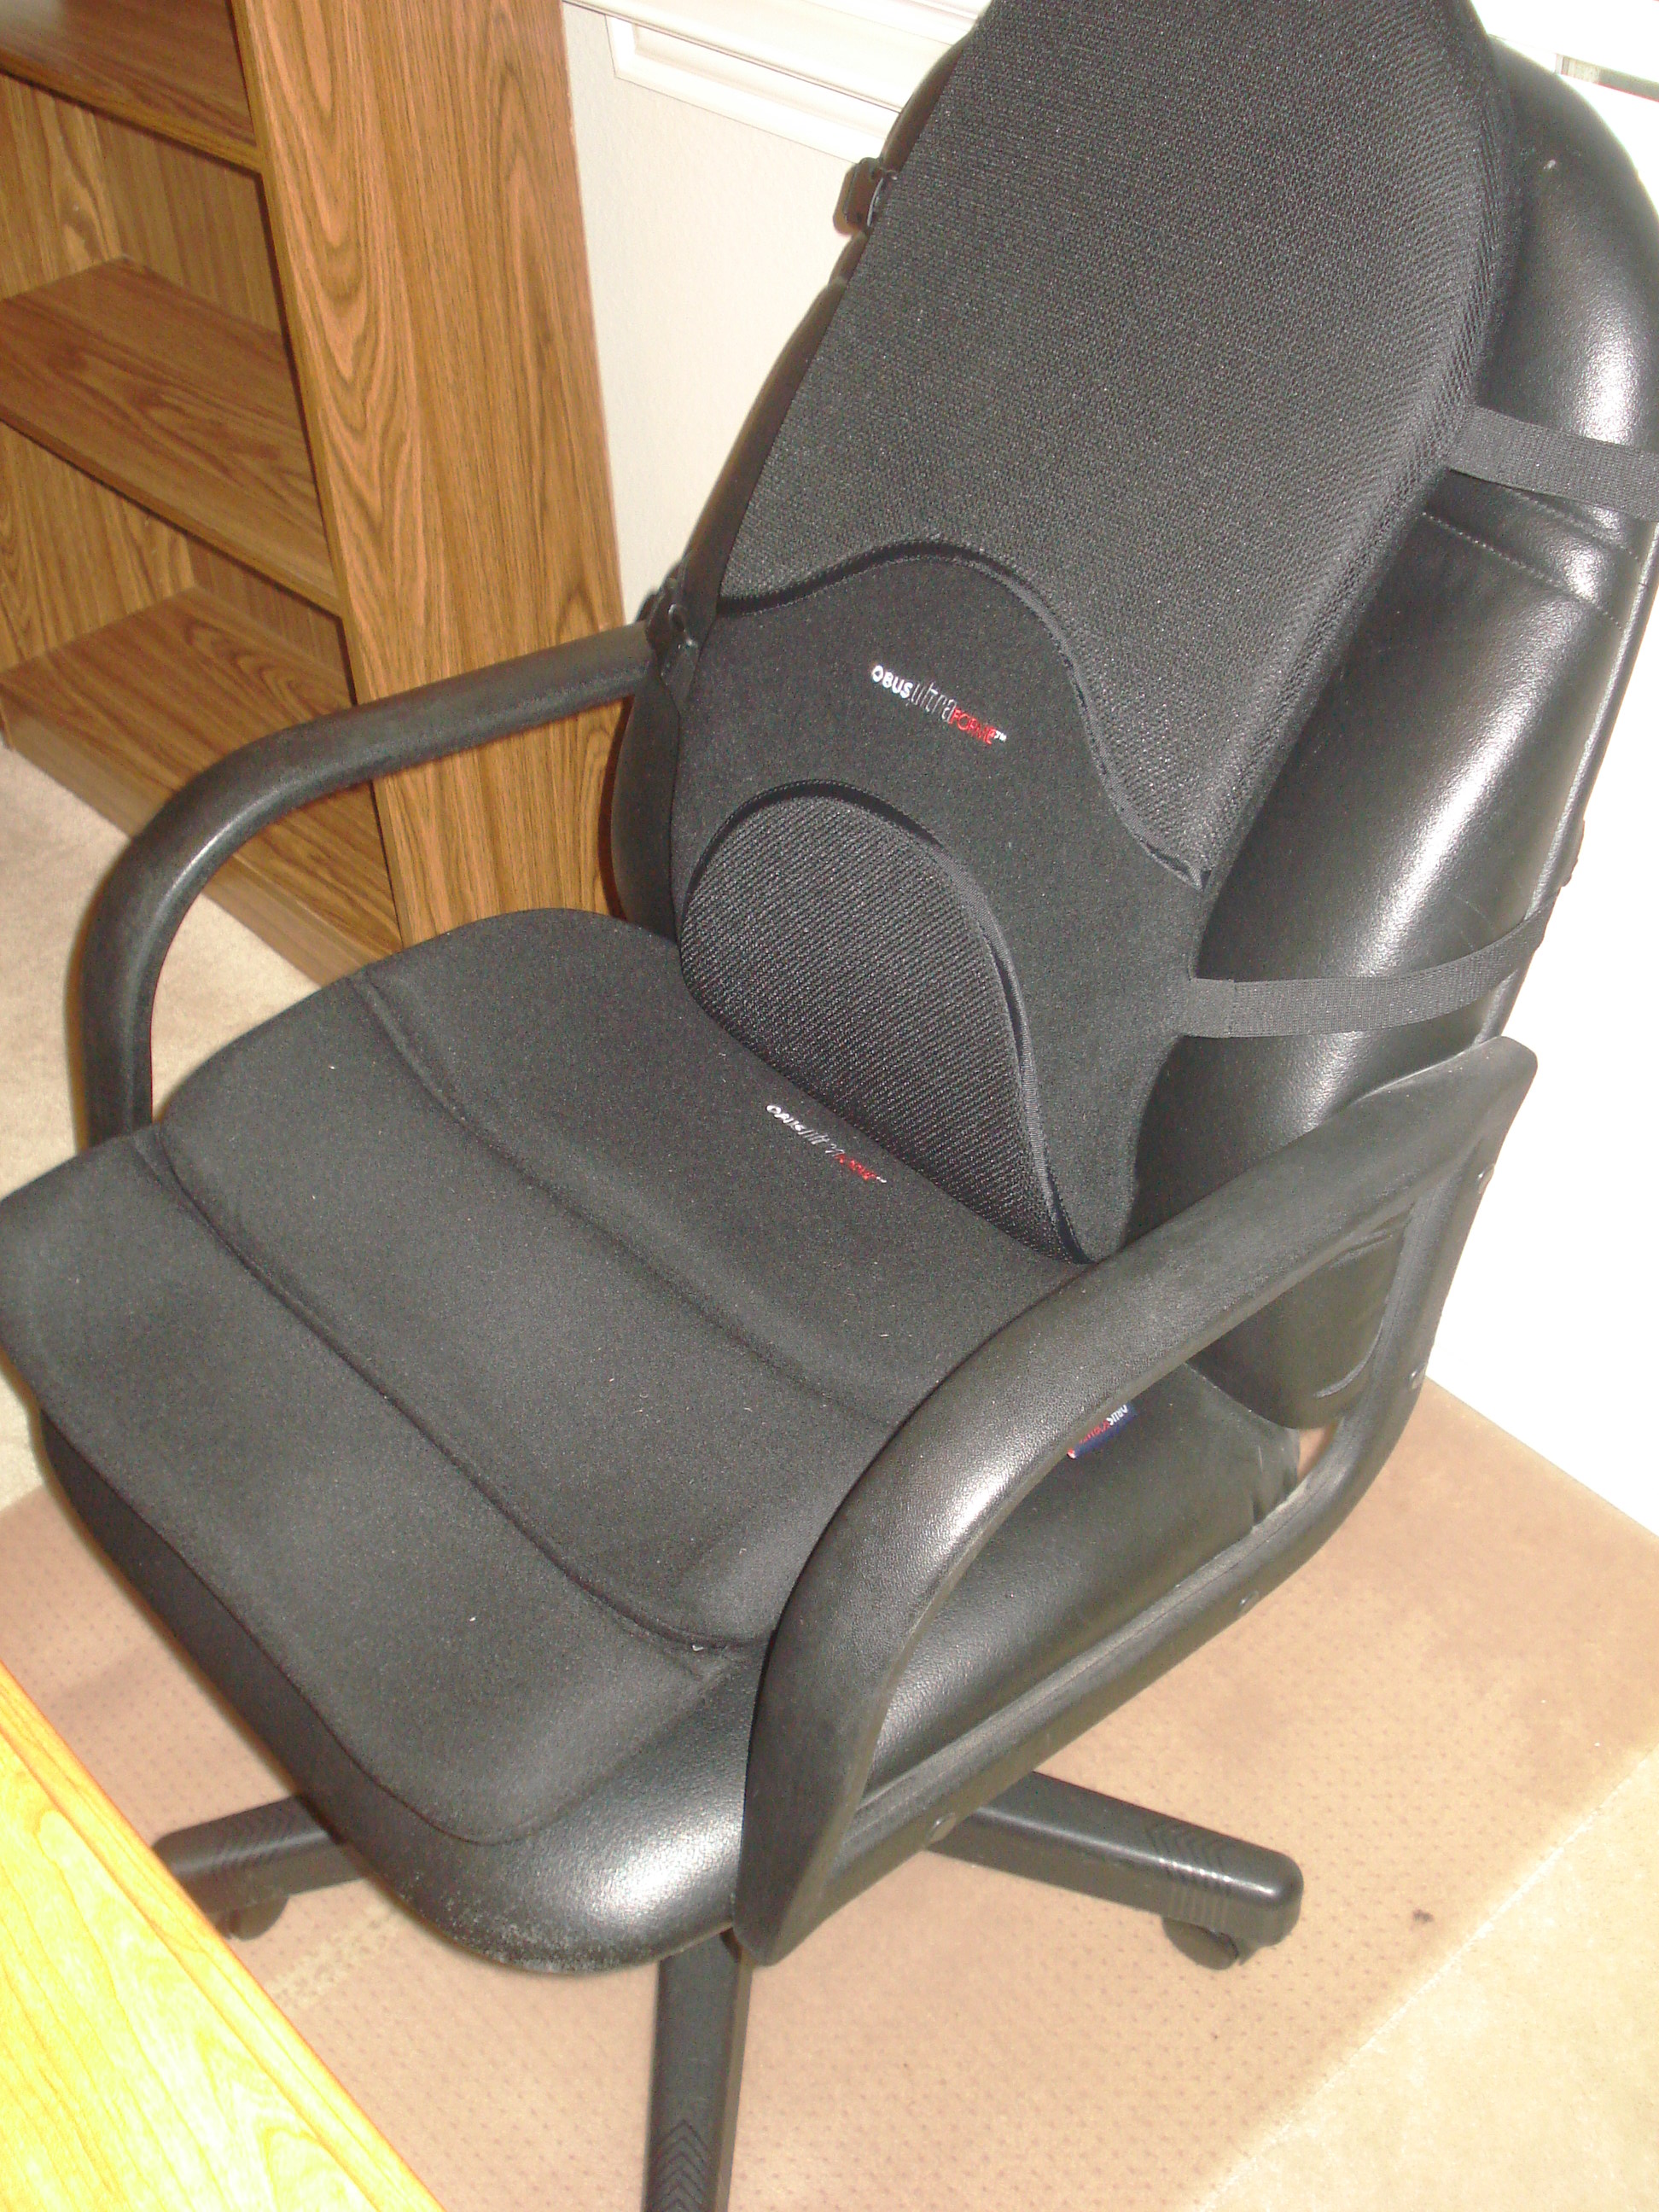 https://www.crossfireforum.org/forum/attachments/parts-accessories-sale-archive/16546d1256273545-obusforme-seat-cushion-back-support-cure-uncomfortable-xfire-seats-003.jpg